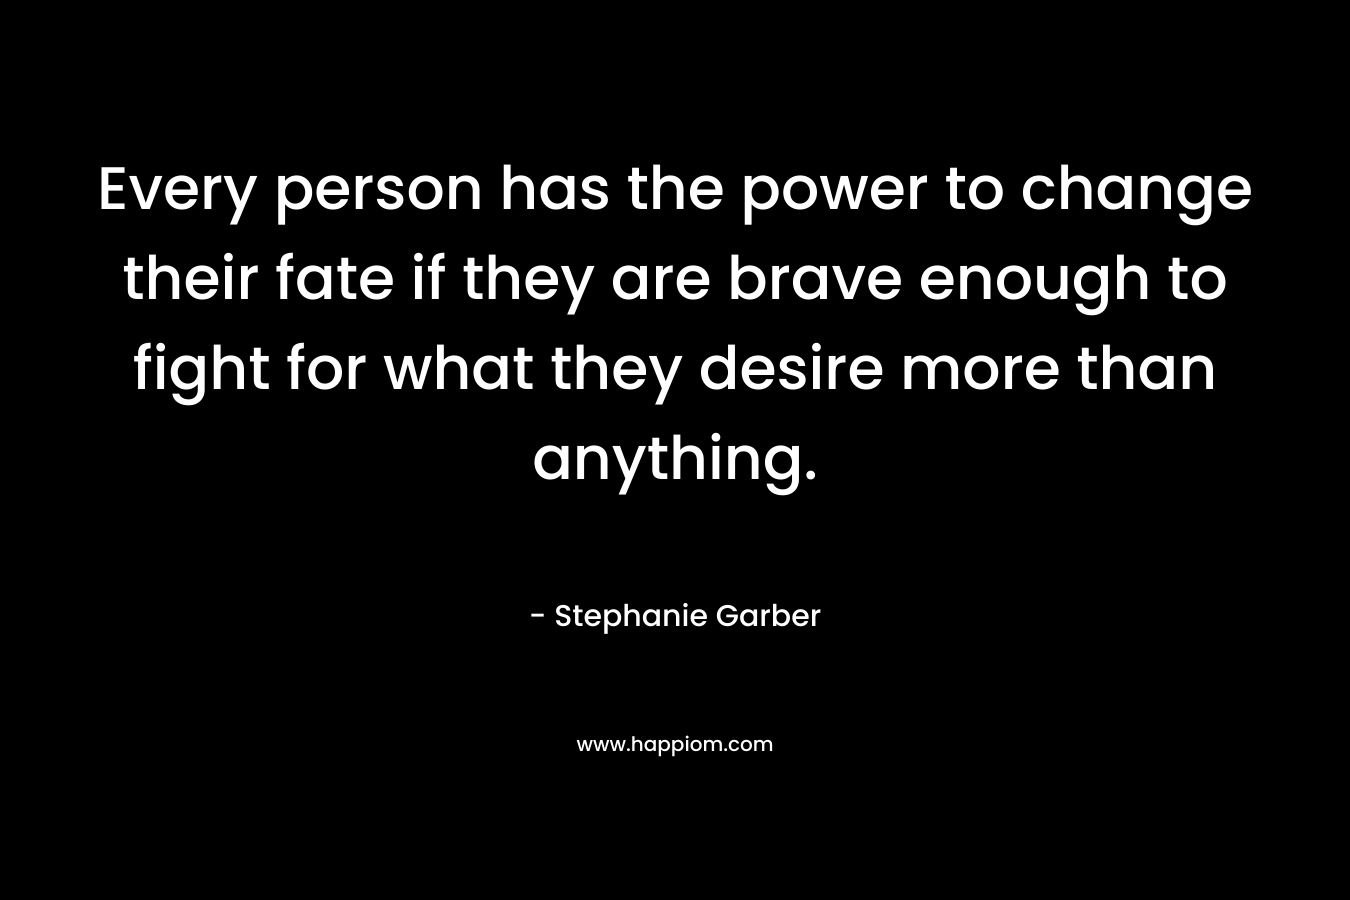 Every person has the power to change their fate if they are brave enough to fight for what they desire more than anything.